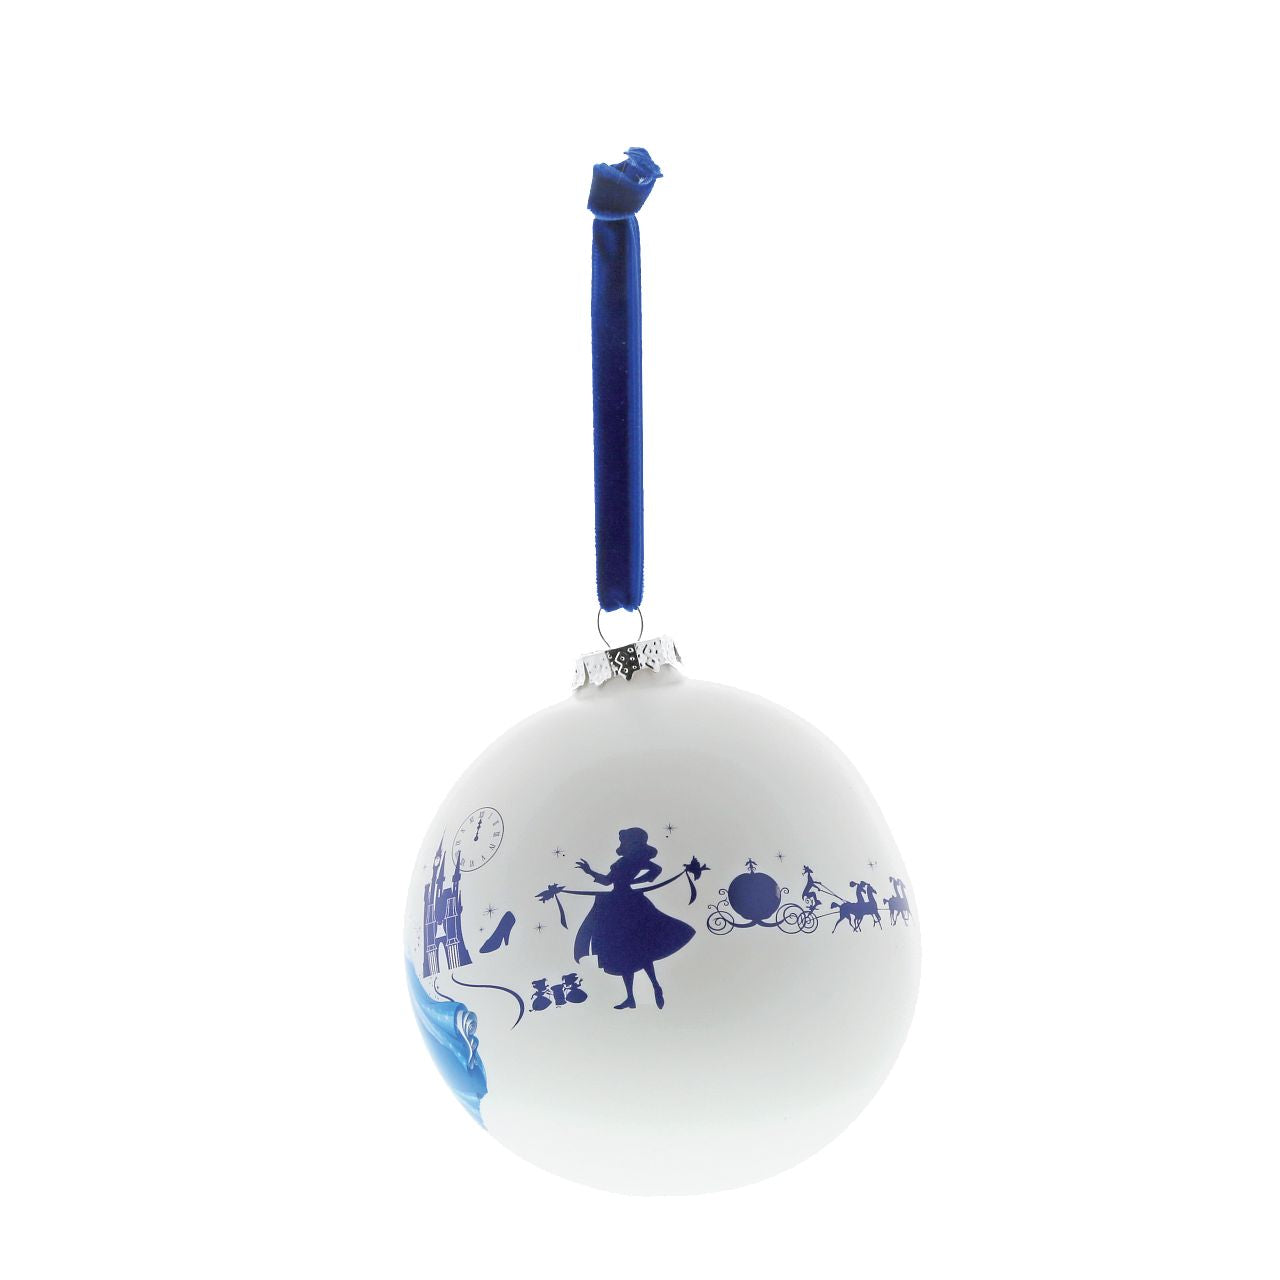 Disney Collection Cinderella Bauble A Wonderful Dream  Cinderella waits for the magic to fade at the stroke of midnight in this beautiful glass bauble. This treasured keepsake would make a lovely unique gift for a friend, or a self-purchase to brighten up the home. Presented in a branded window box.